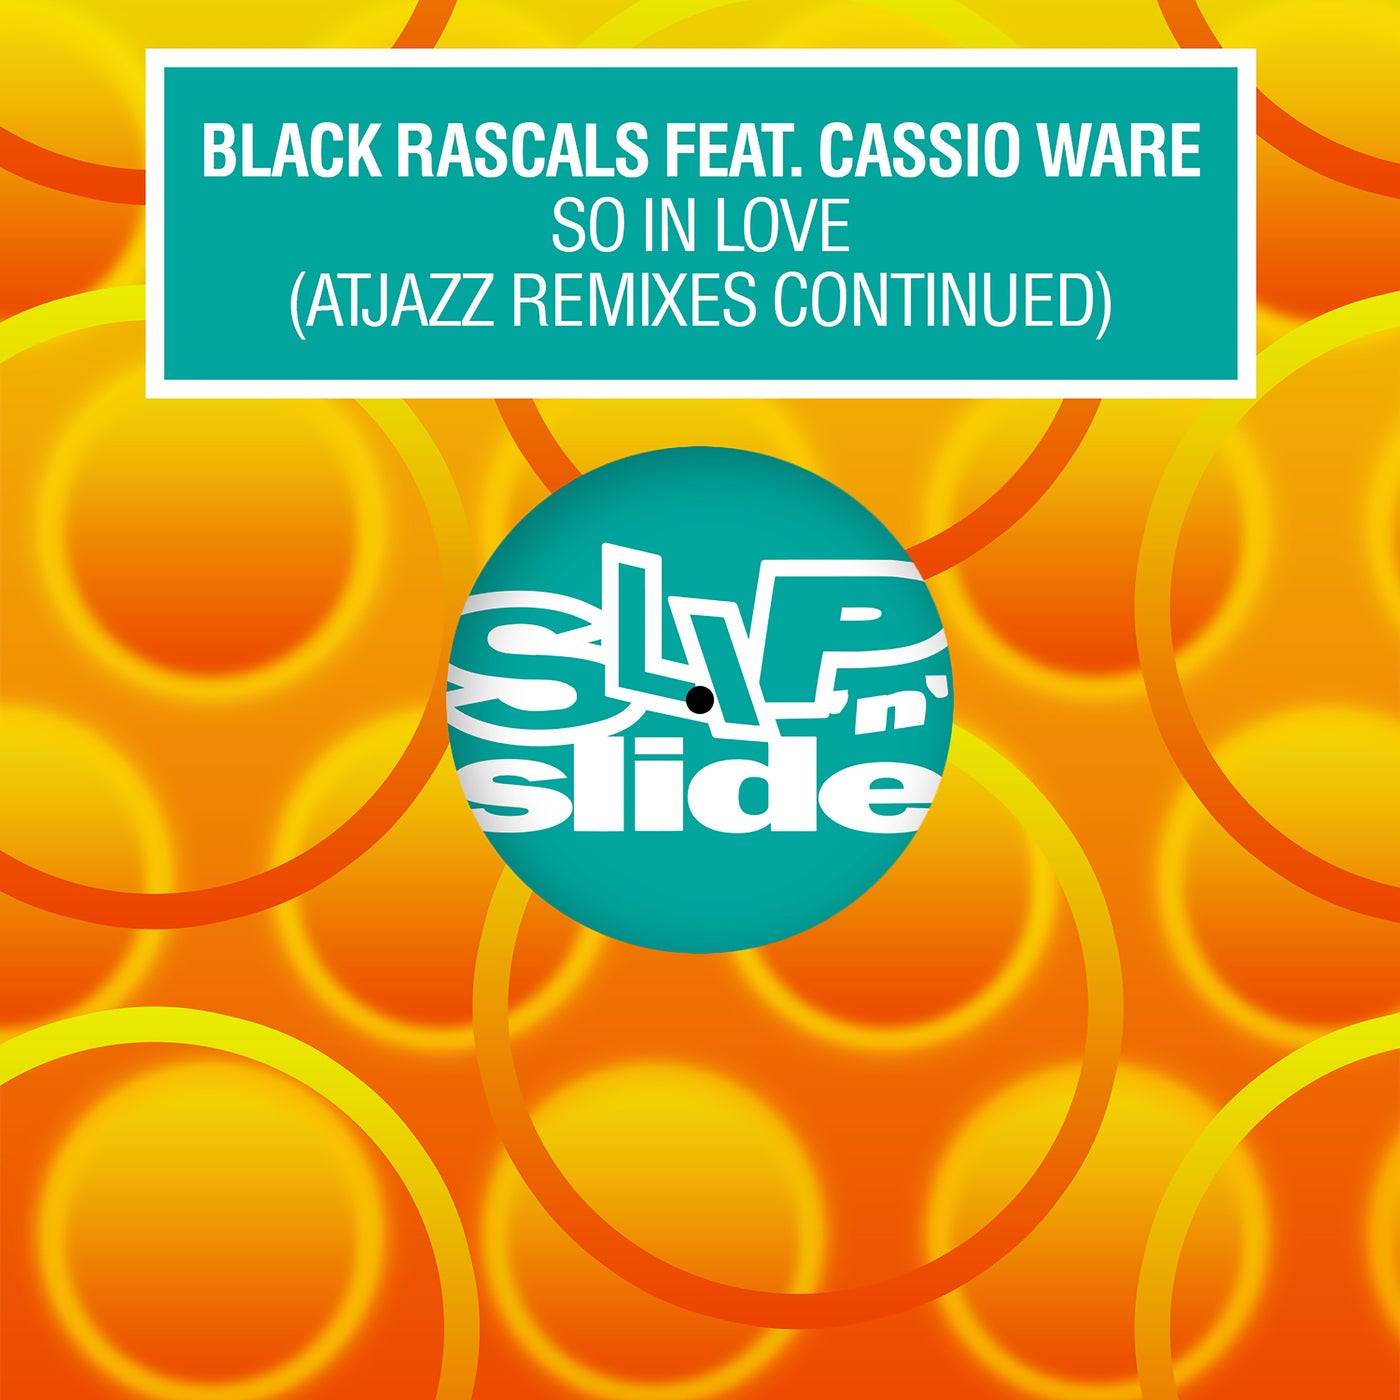 Cover - Cassio Ware, Black Rascals - So In Love feat. Cassio Ware (Atjazz Galaxy Aart Extended Remix)